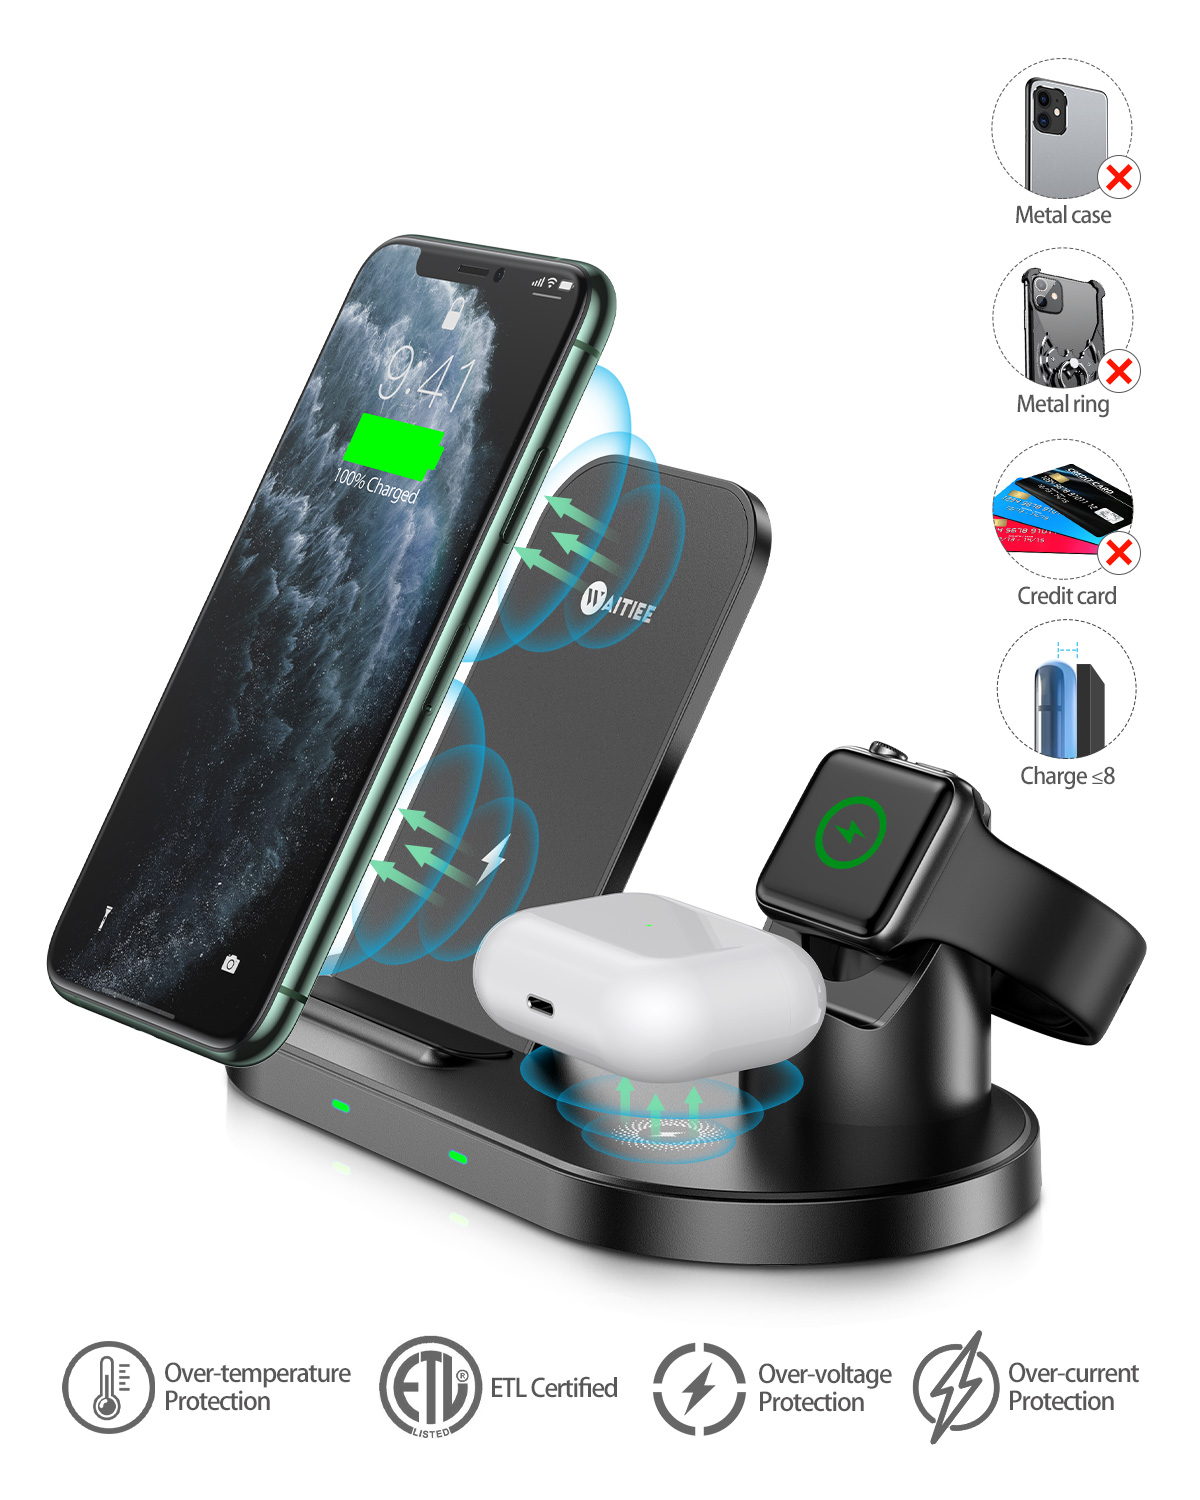 WAITIEE Wireless Charger 3 in 1 Stand for iPhone Apple iWatch Series 6/5/4/3 /2/1 AirPods pro, QI Phone Charger 15W Fast Charging Dock iPhone  12/11/11Pro/ 11 Pro Max/XS/XR/X/8/8 Plus/Samsung/Google